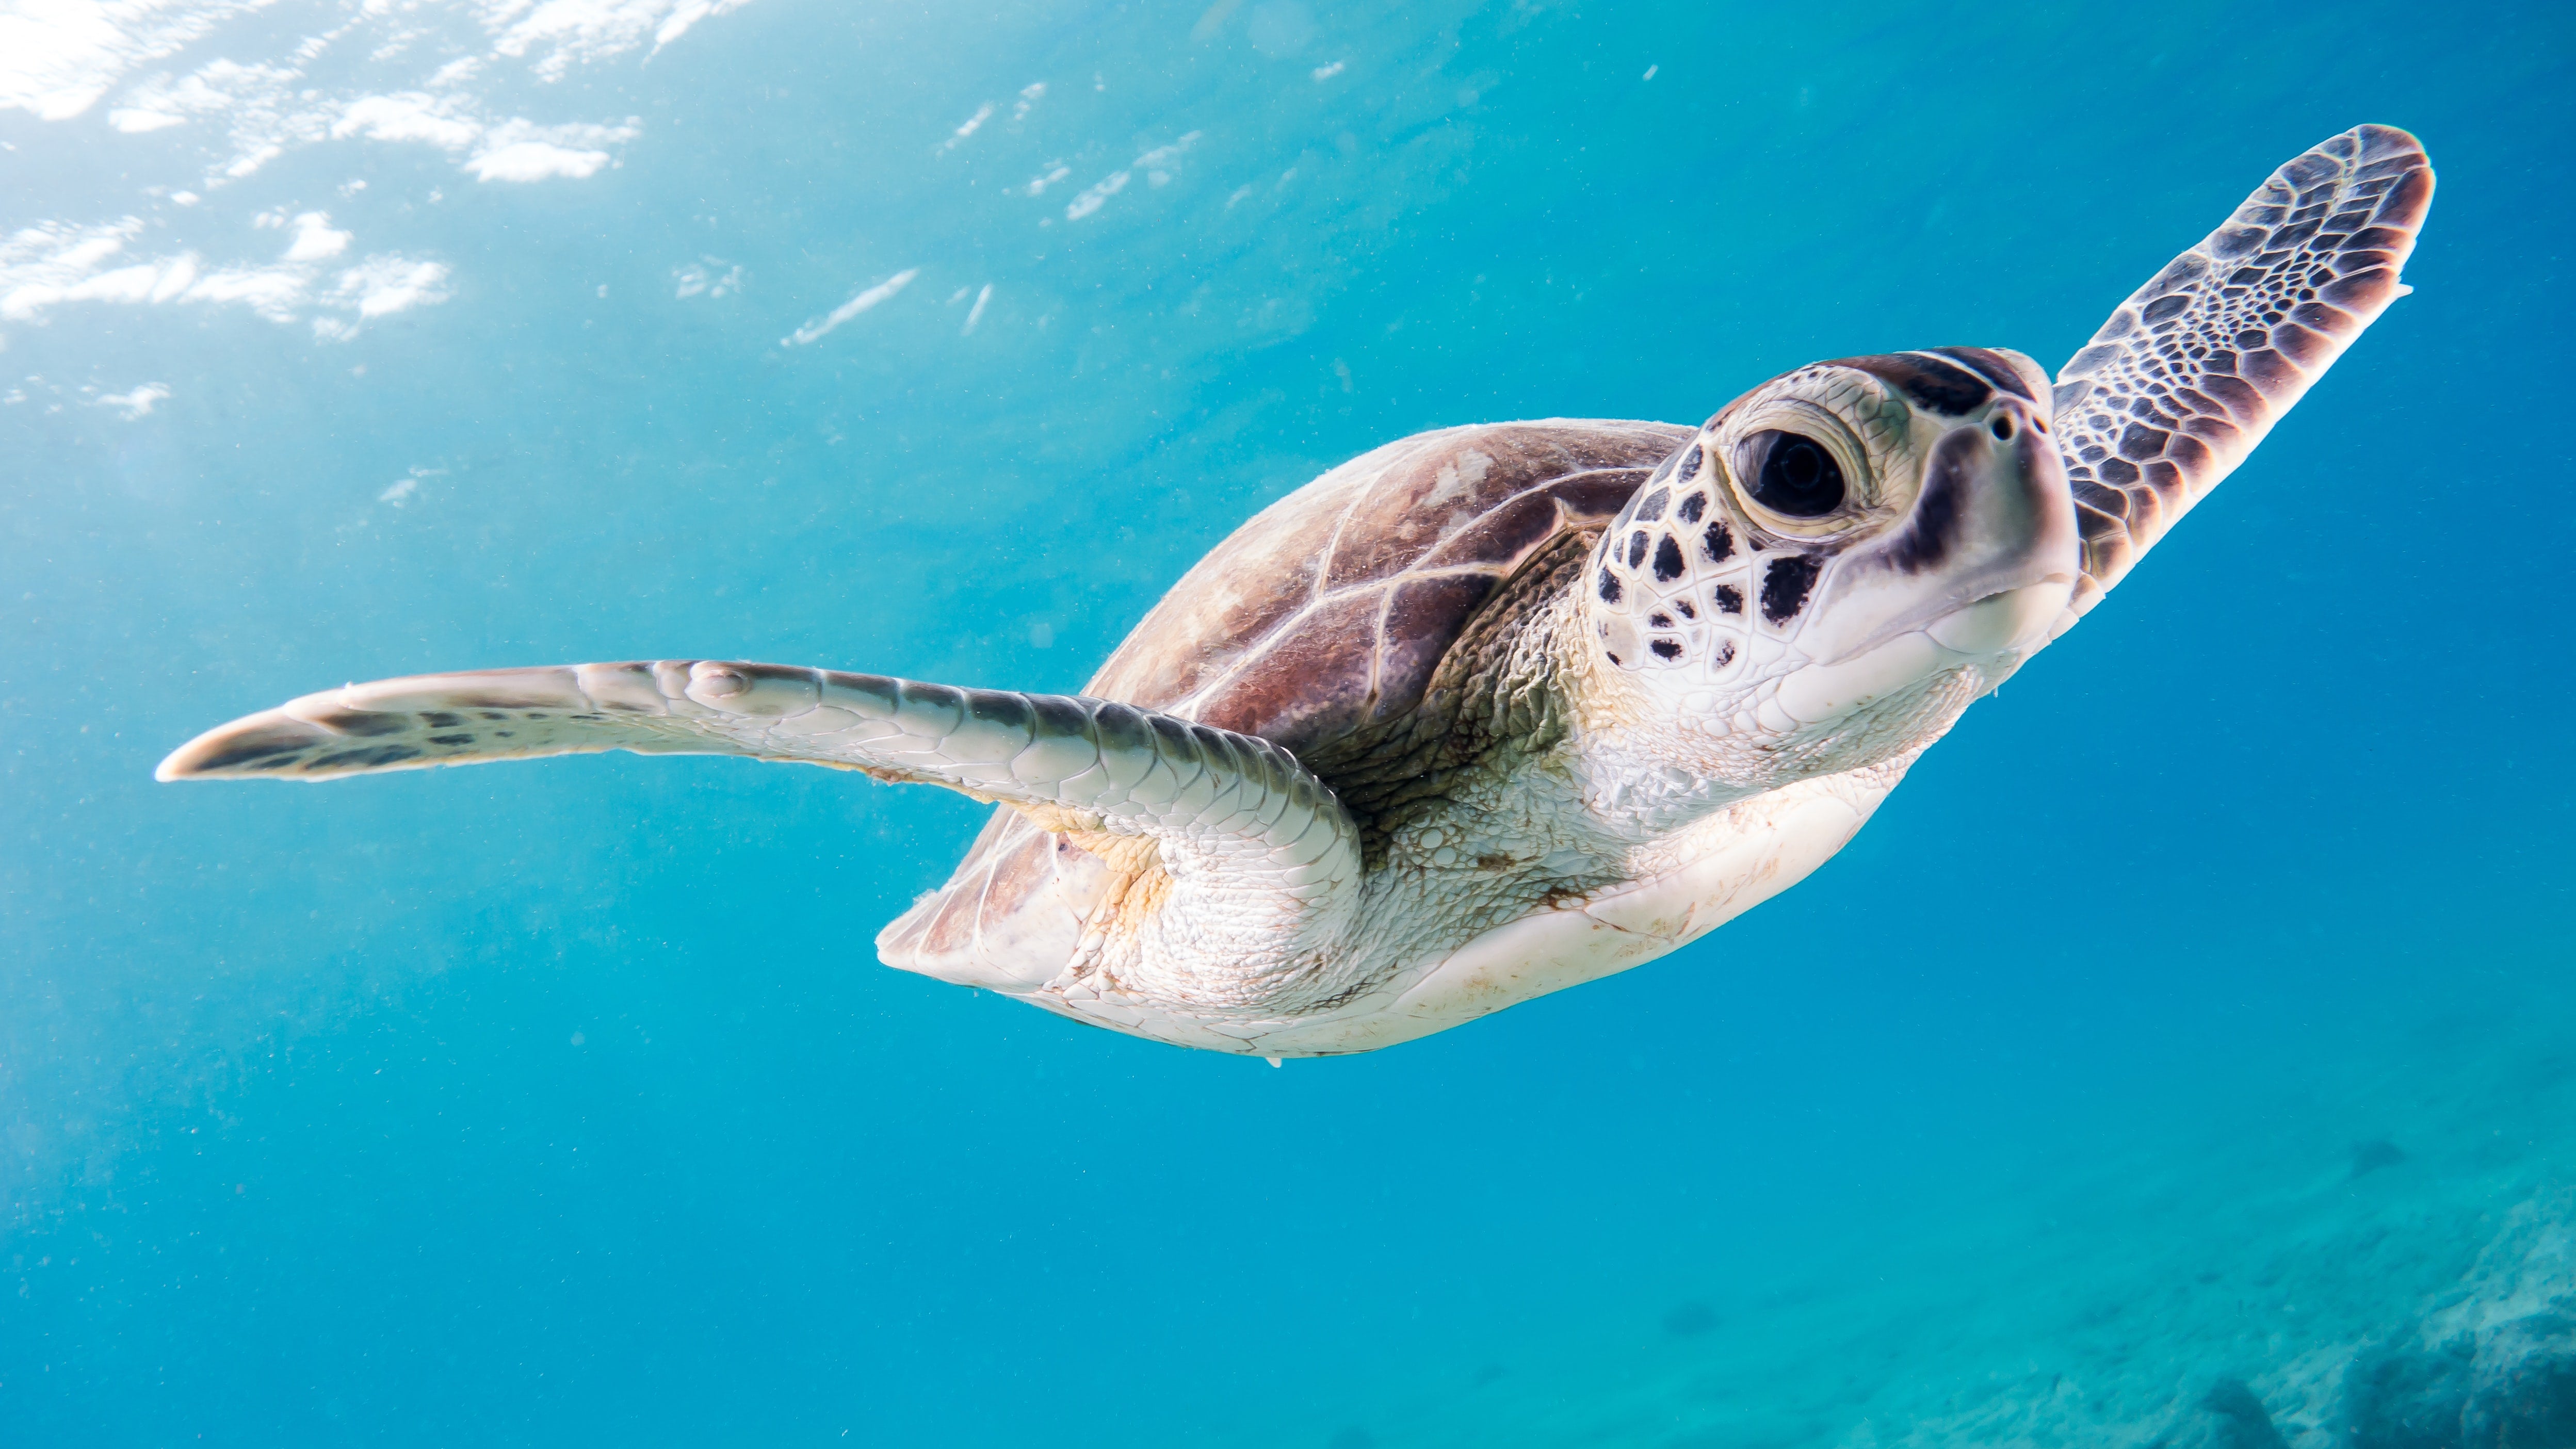 5 Amazing Turtle Facts to Know for World Turtle Day